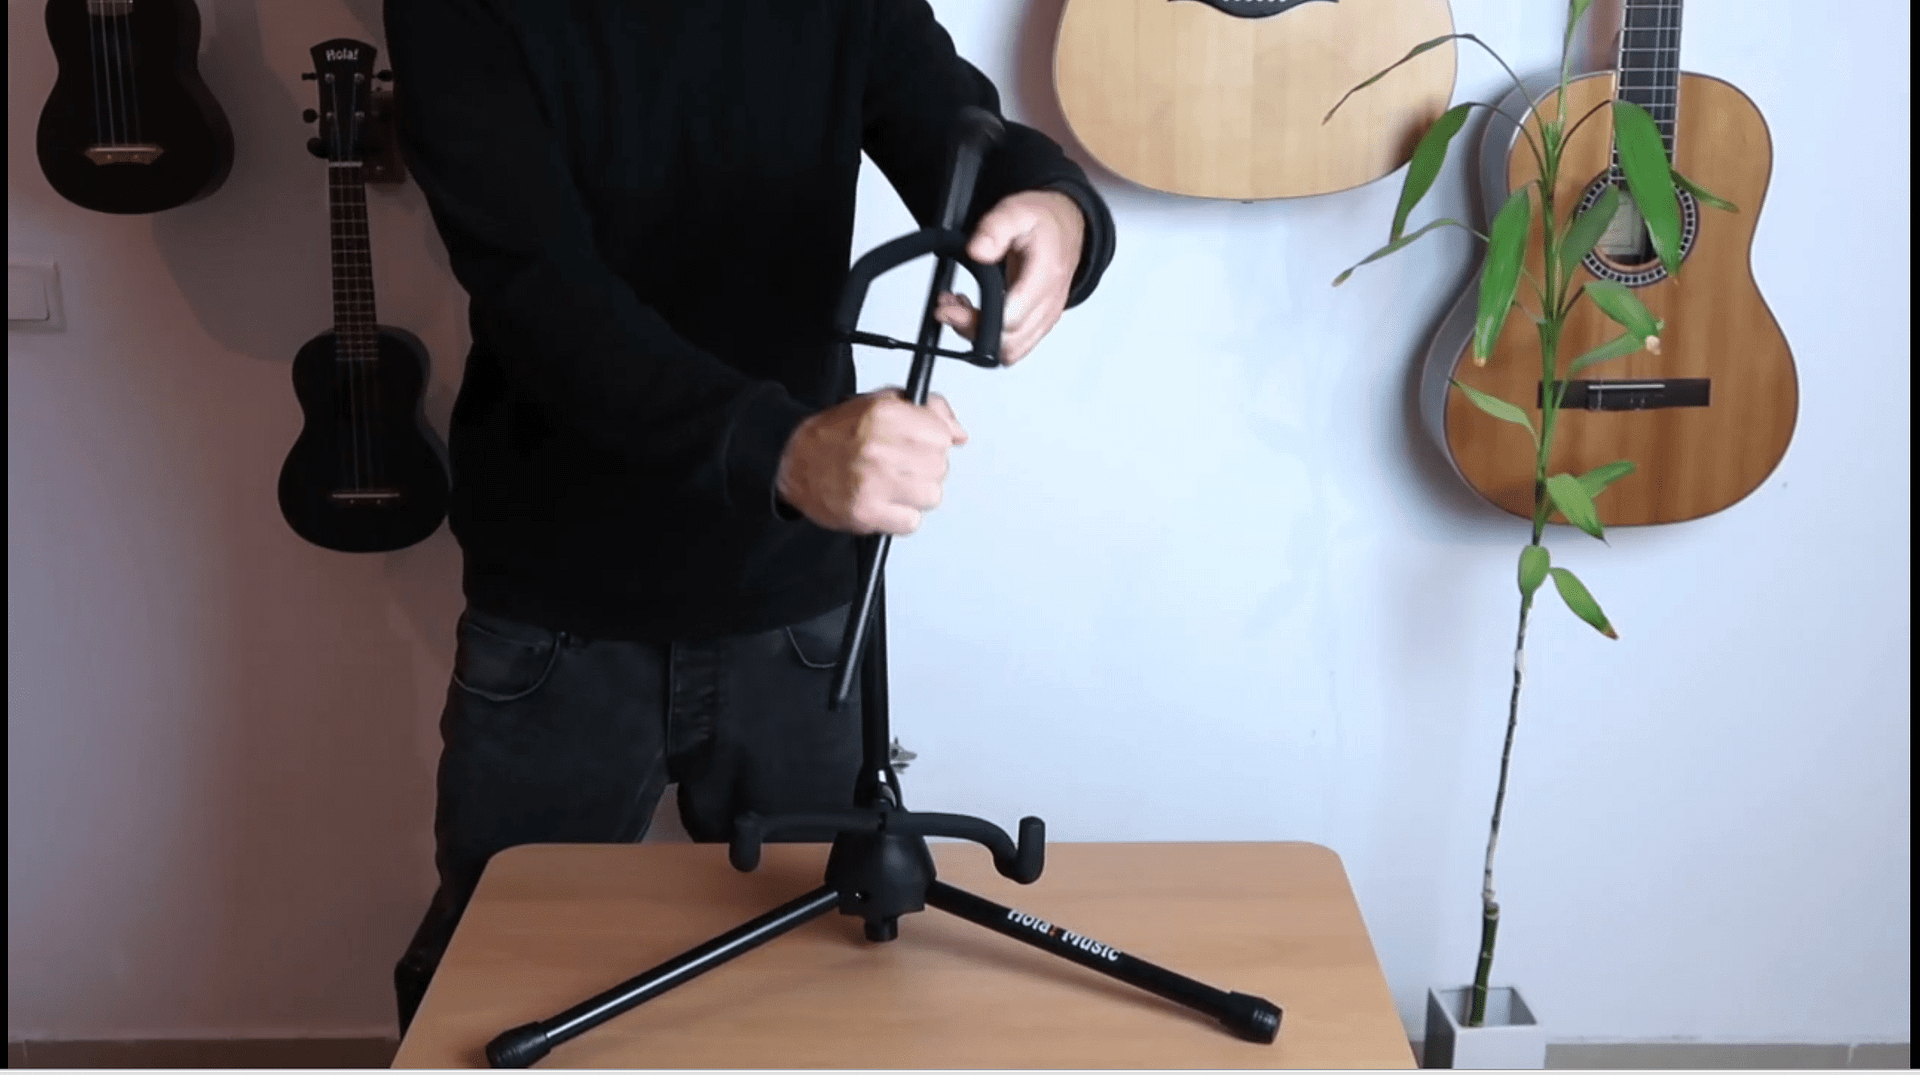 Universal Guitar Stand by Hola! Music – Fits Acoustic, Classical, Electric, Bass Guitars, Mandolins, Banjos, Ukuleles and Other Stringed Instruments – Black 7